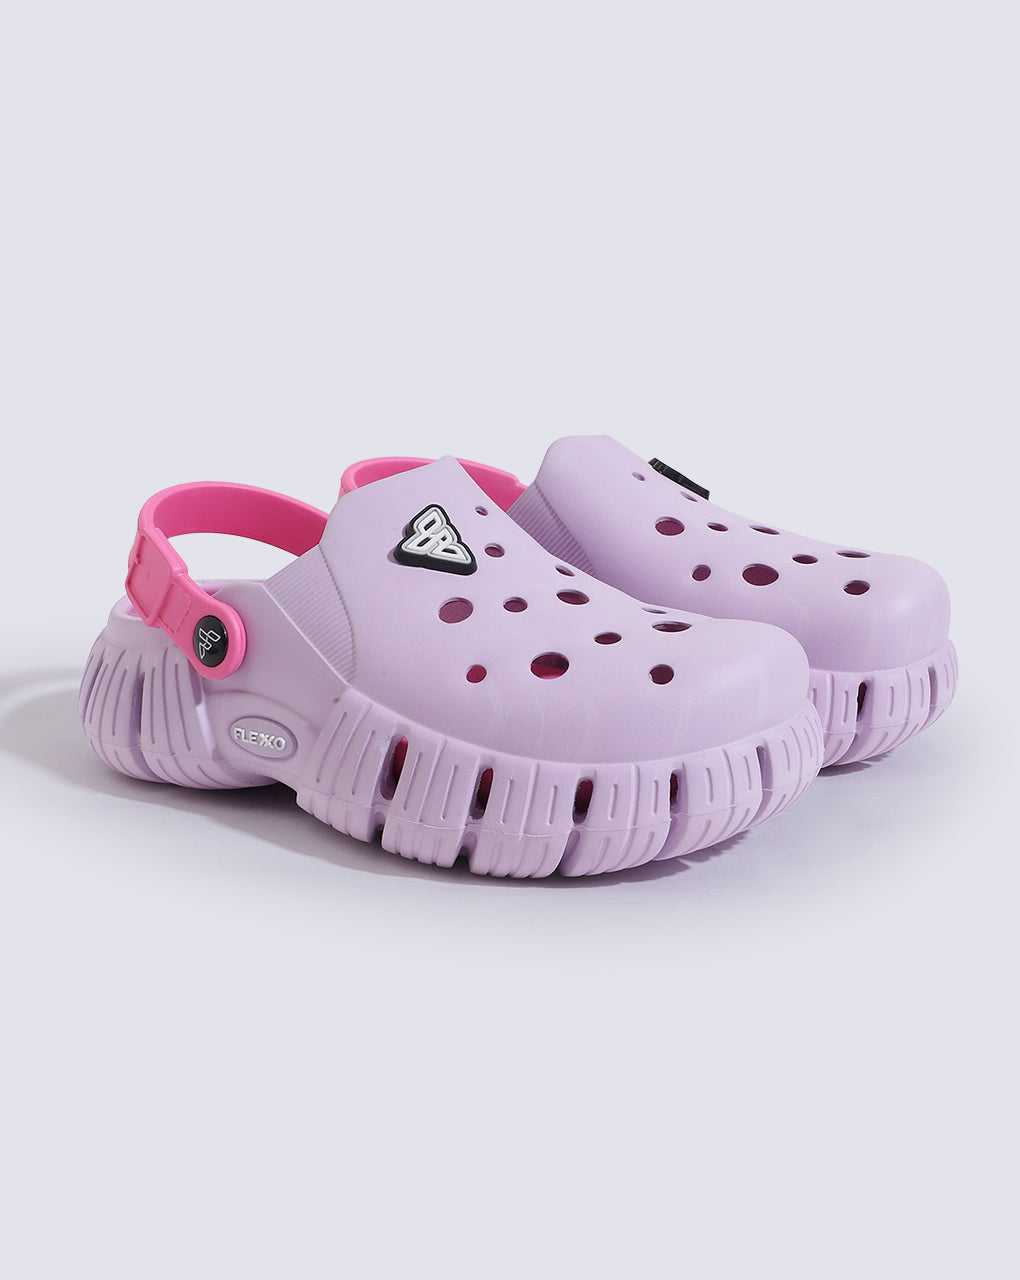 Flexxo Luna clogs in Lilac/Rose Pink, a versatile footwear option for both men and women, offering style and comfort in every step.